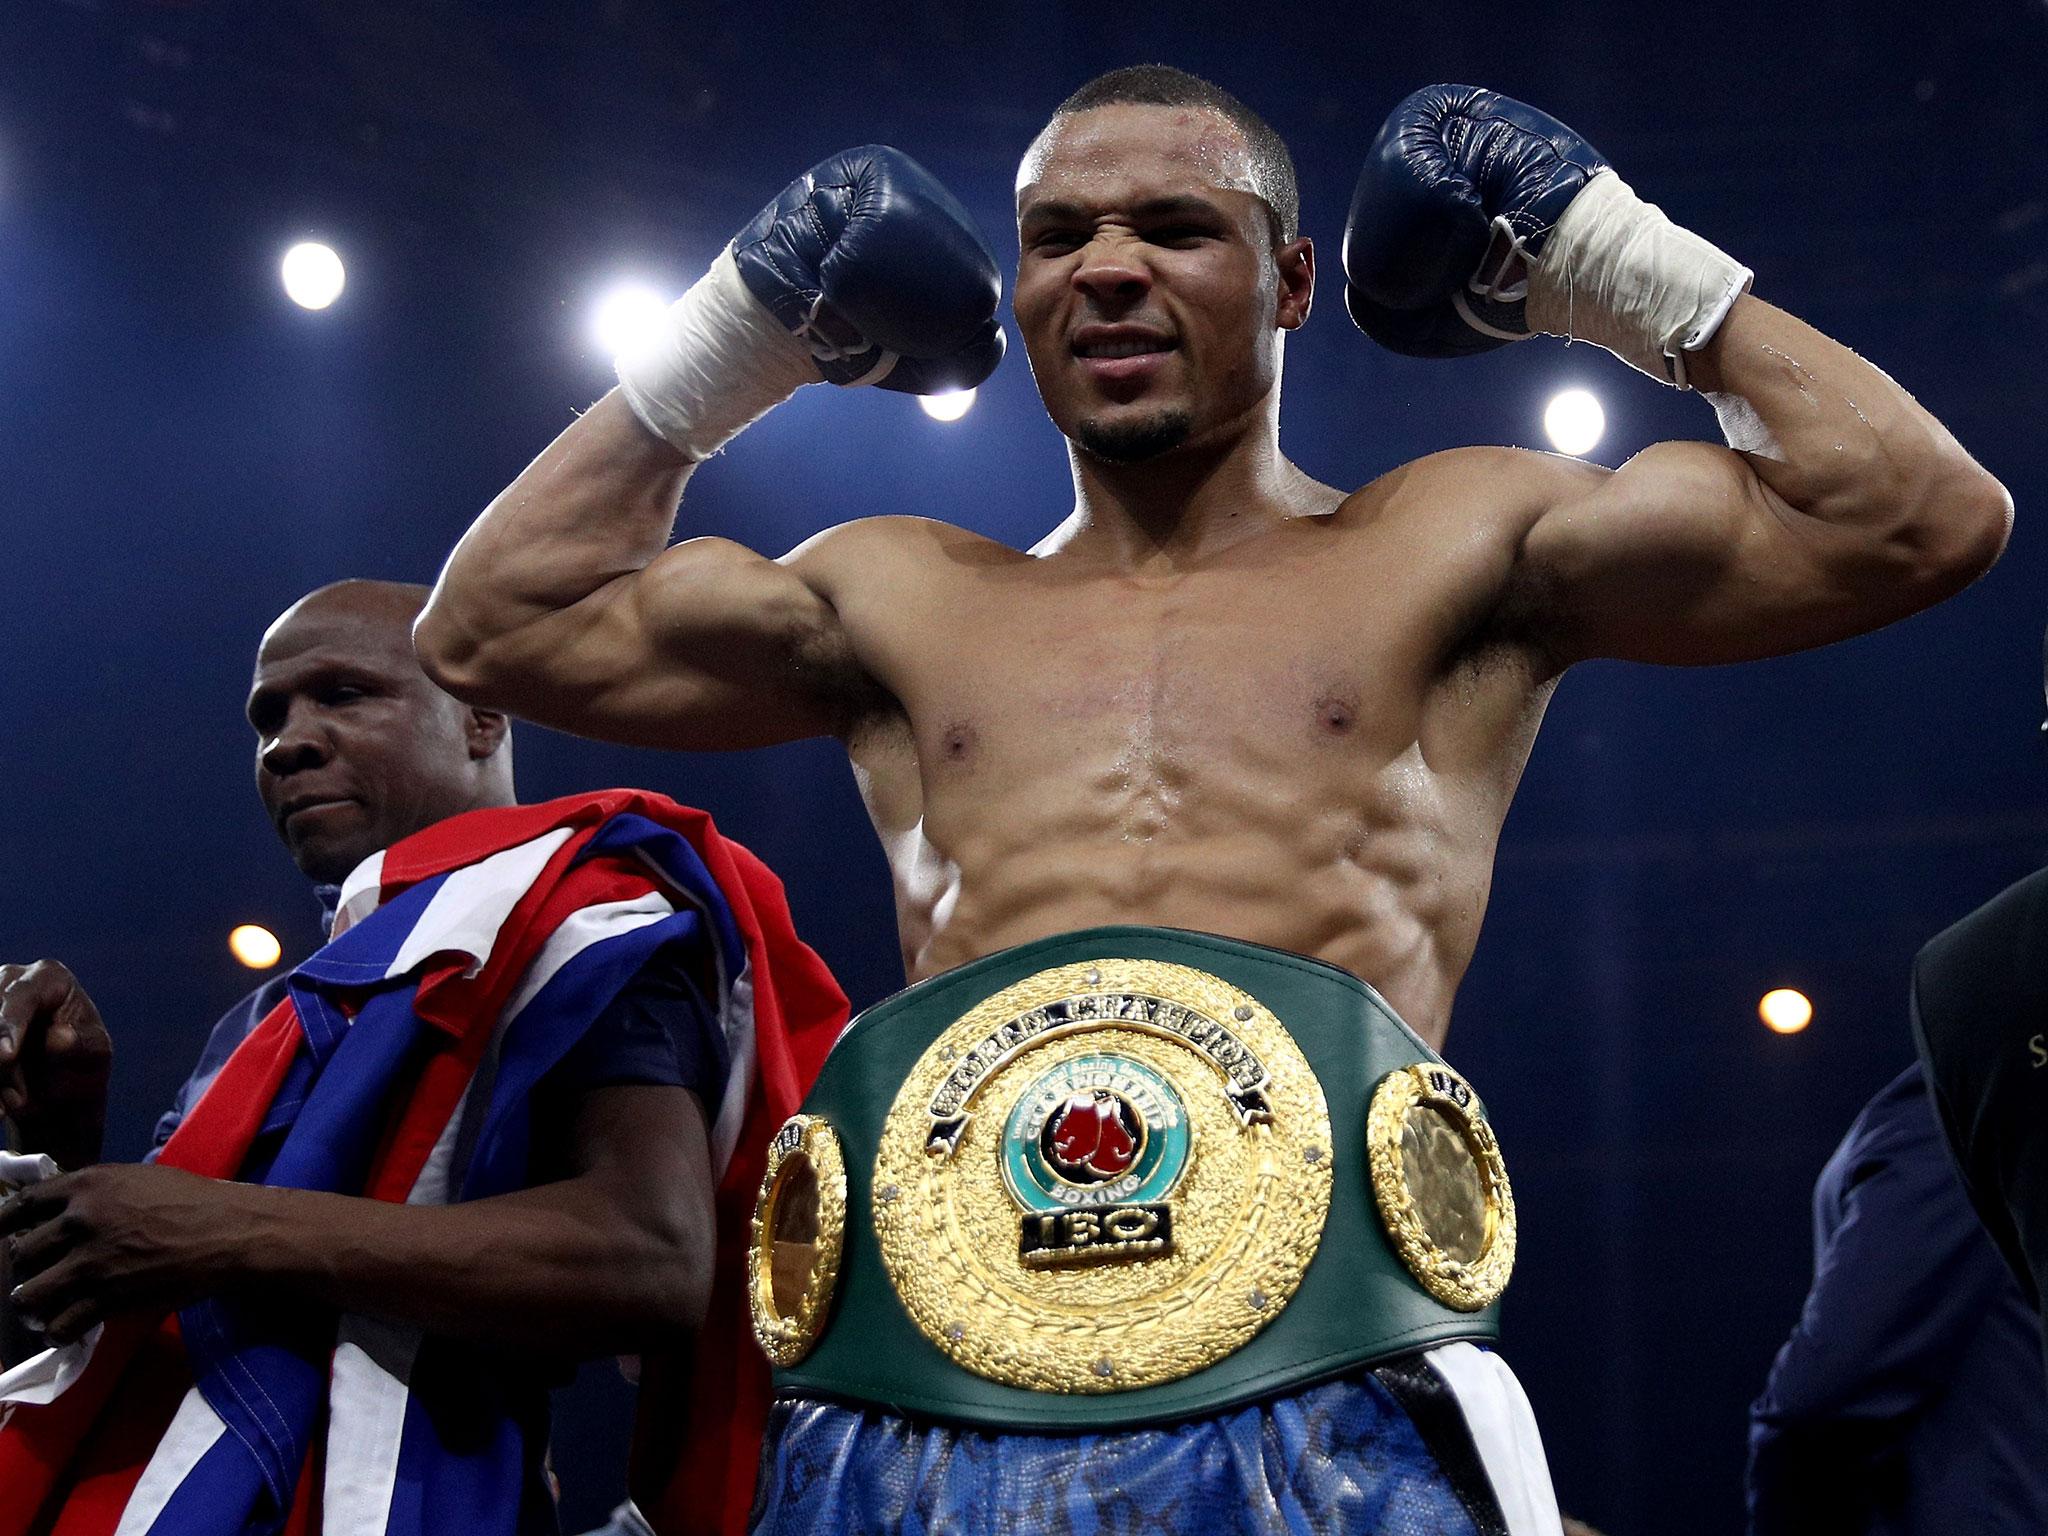 Chris Eubank Jr put on a show in Stuttgart to serve notice of his intentions in the super-middleweight division